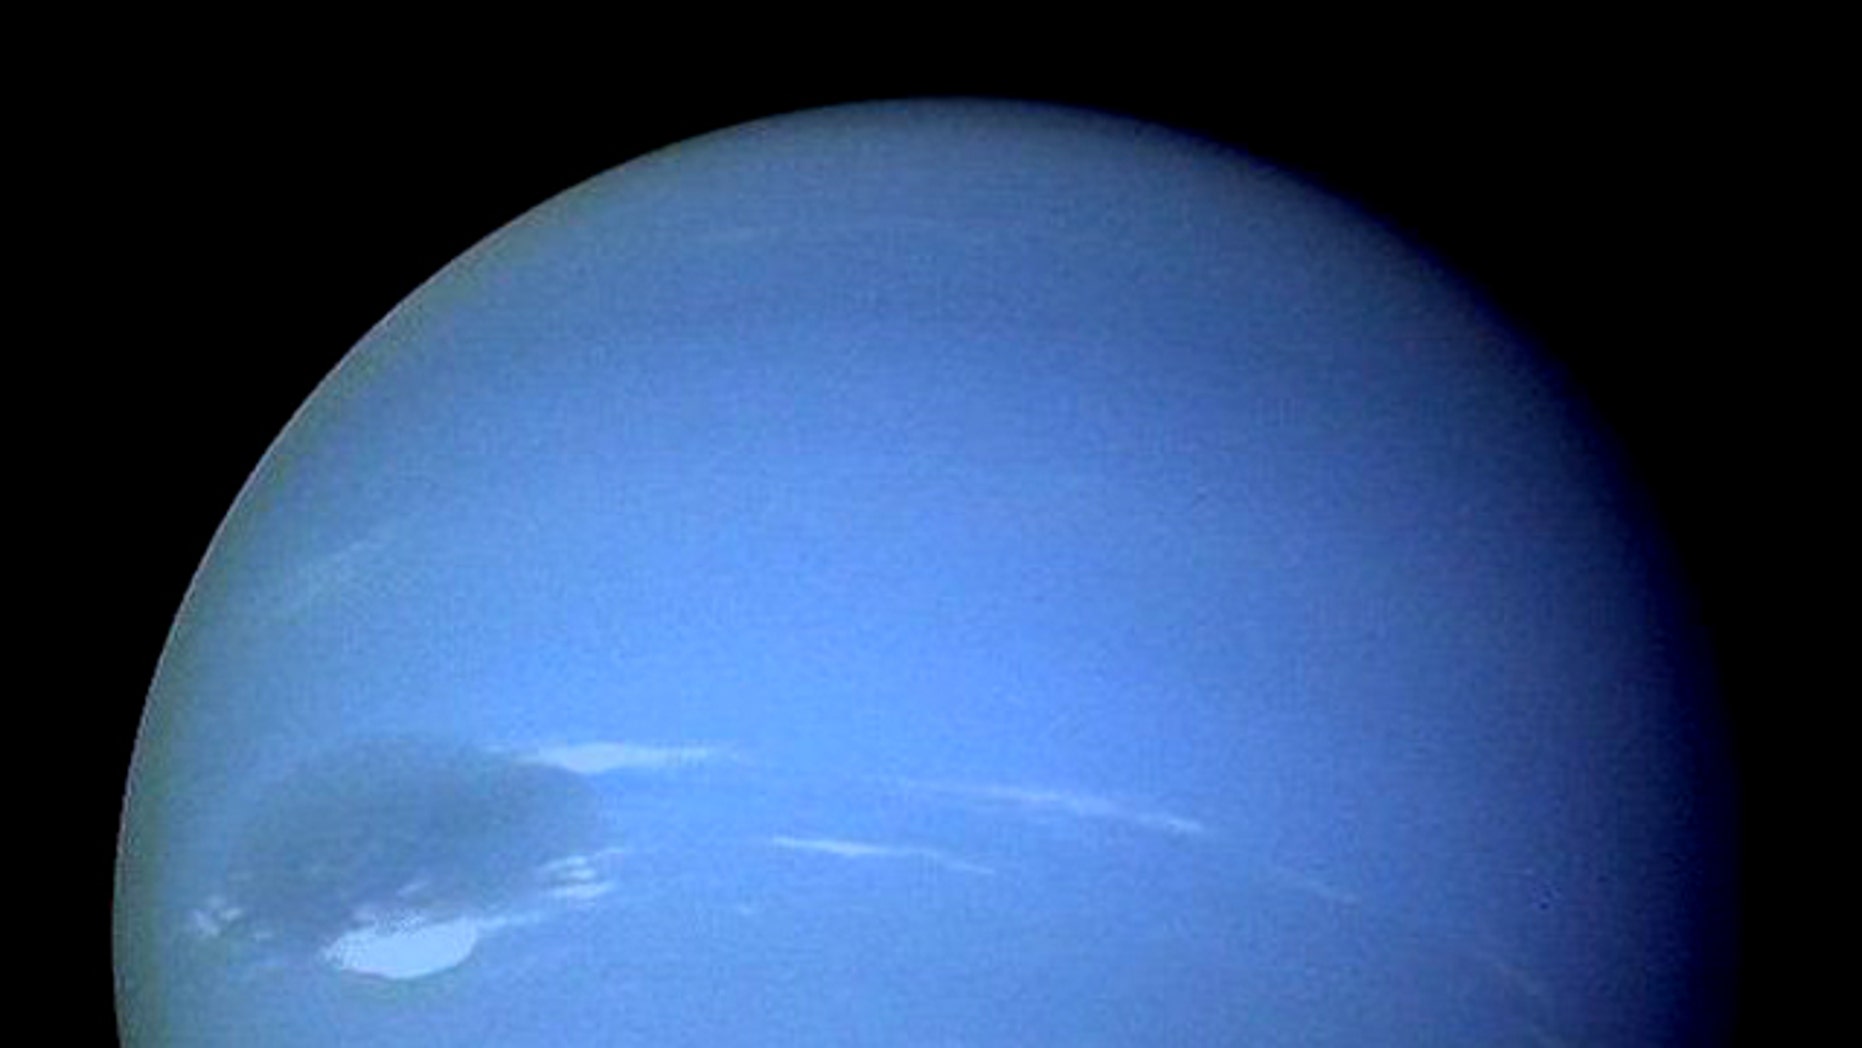 show me a picture of neptune